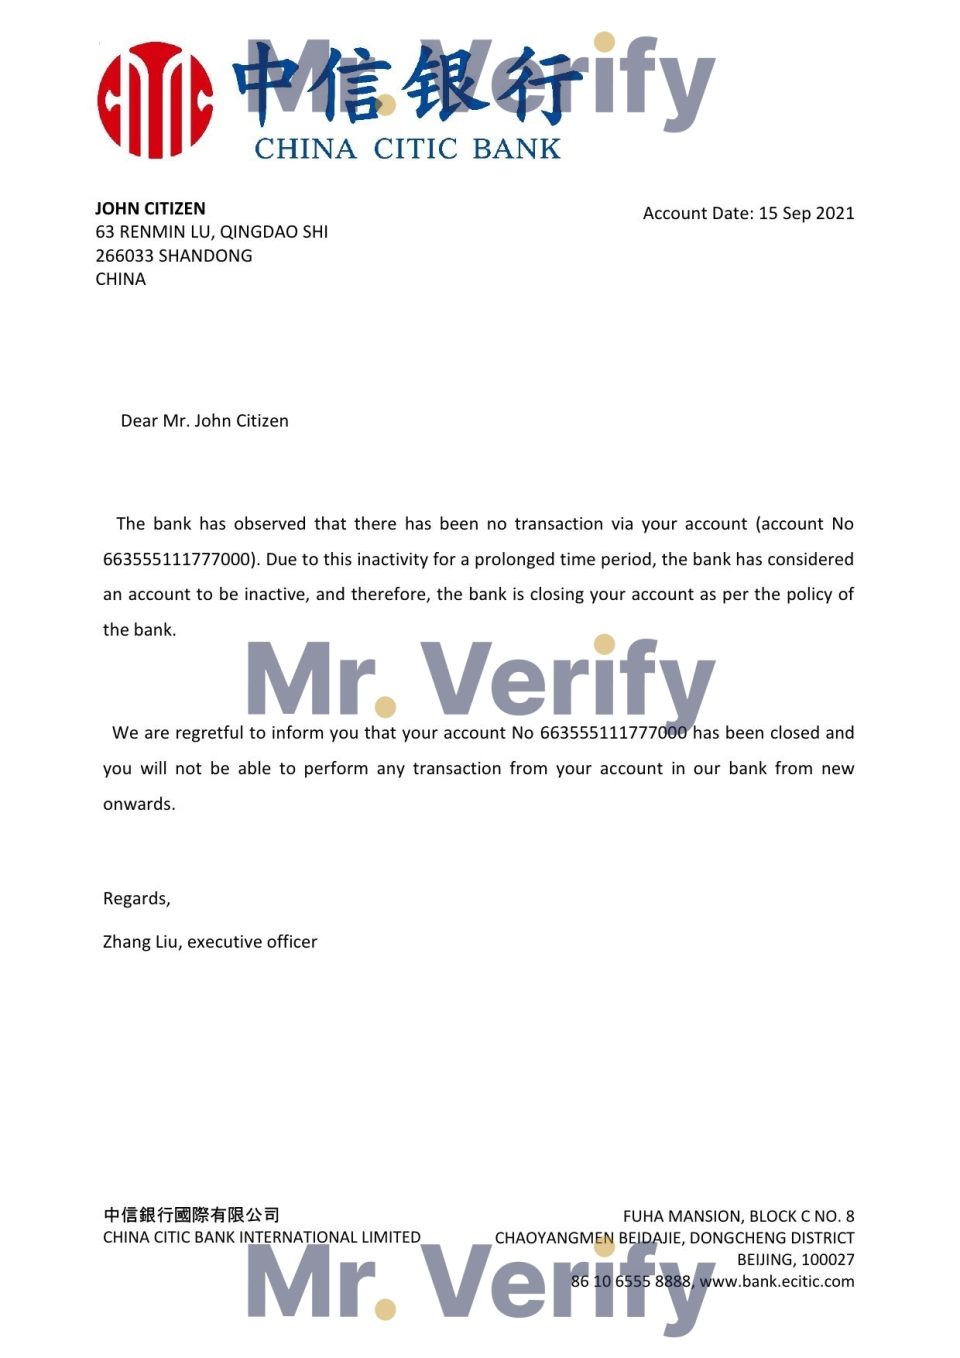 Download China Citic Bank Reference Letter Templates | Editable Word